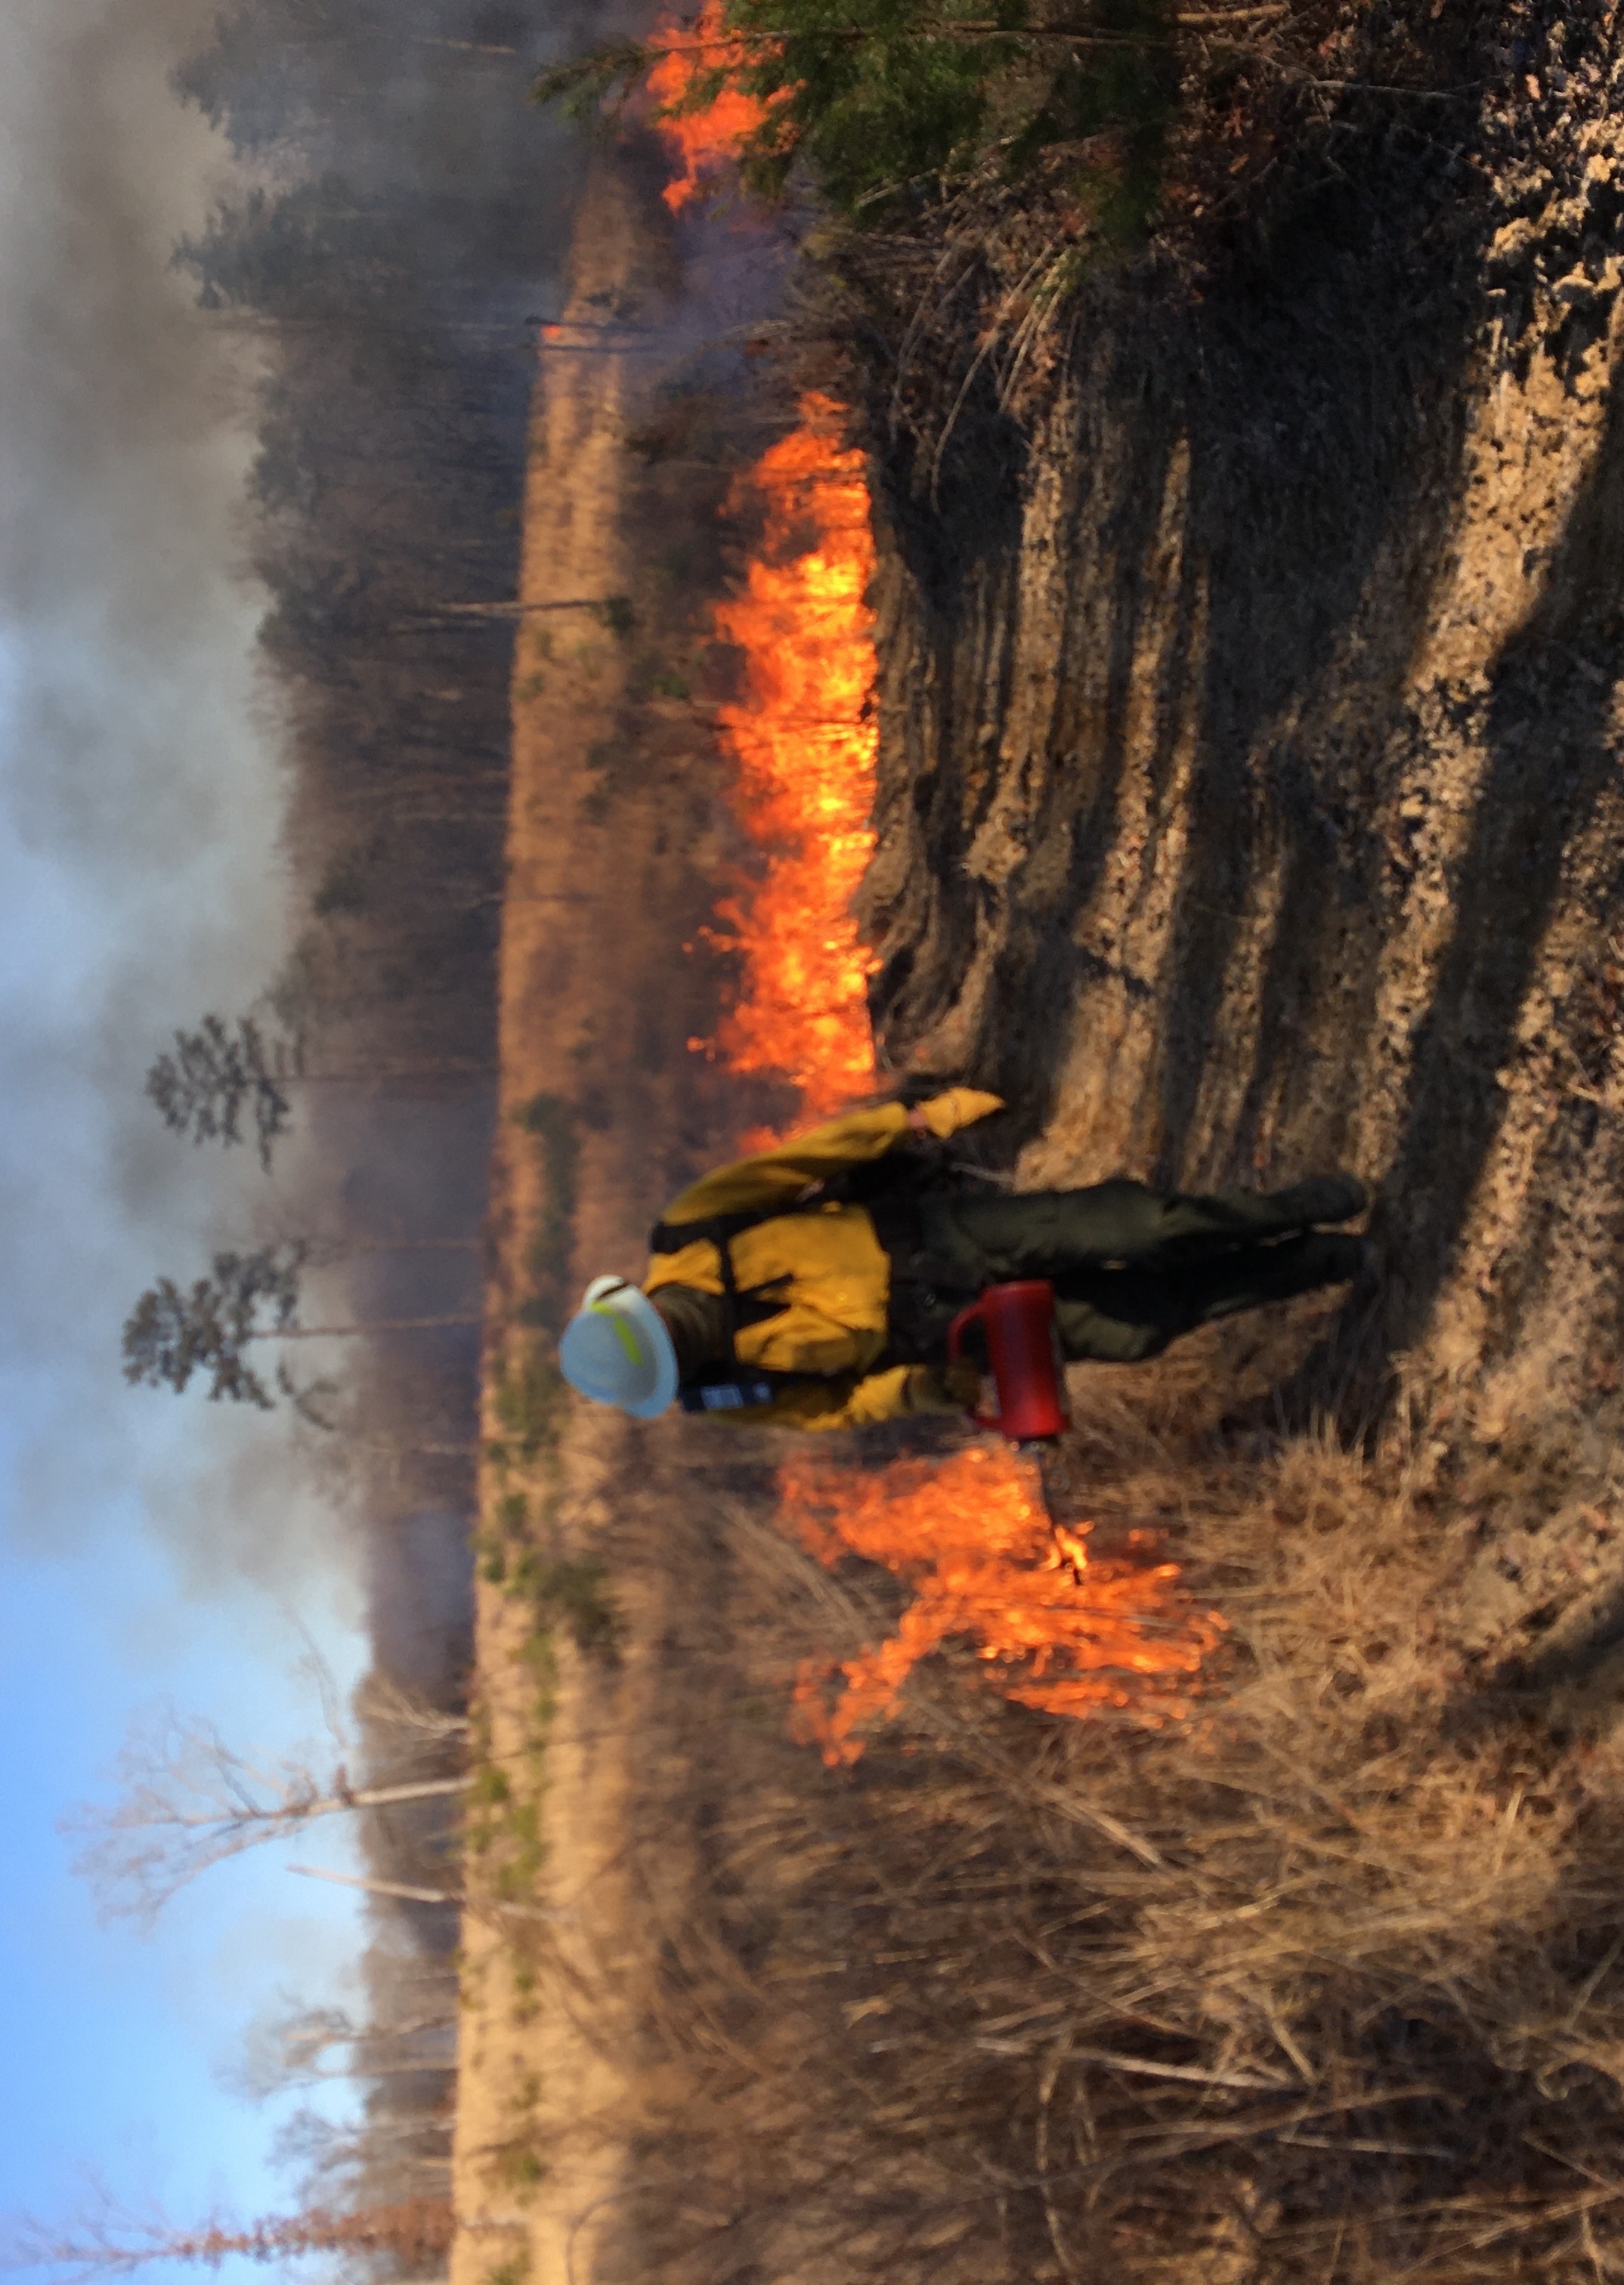 A man in a yellow vest and helmet sets a grassland on fire.